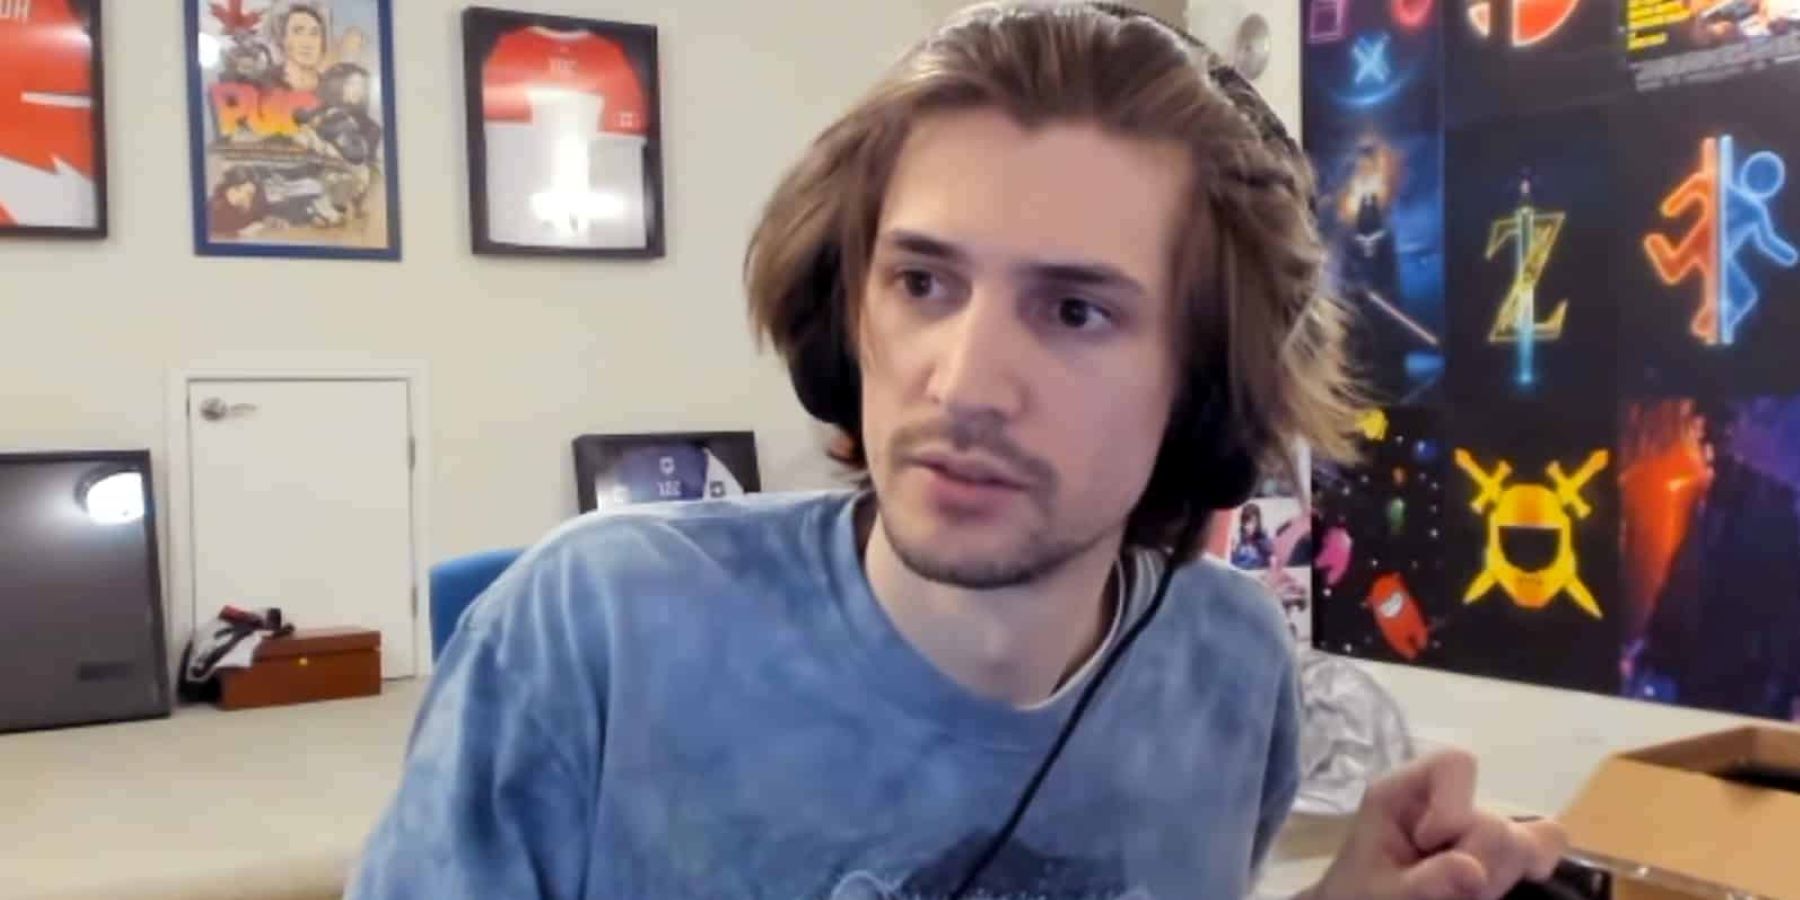 xQc sitting in front of his computer during a Twitch stream